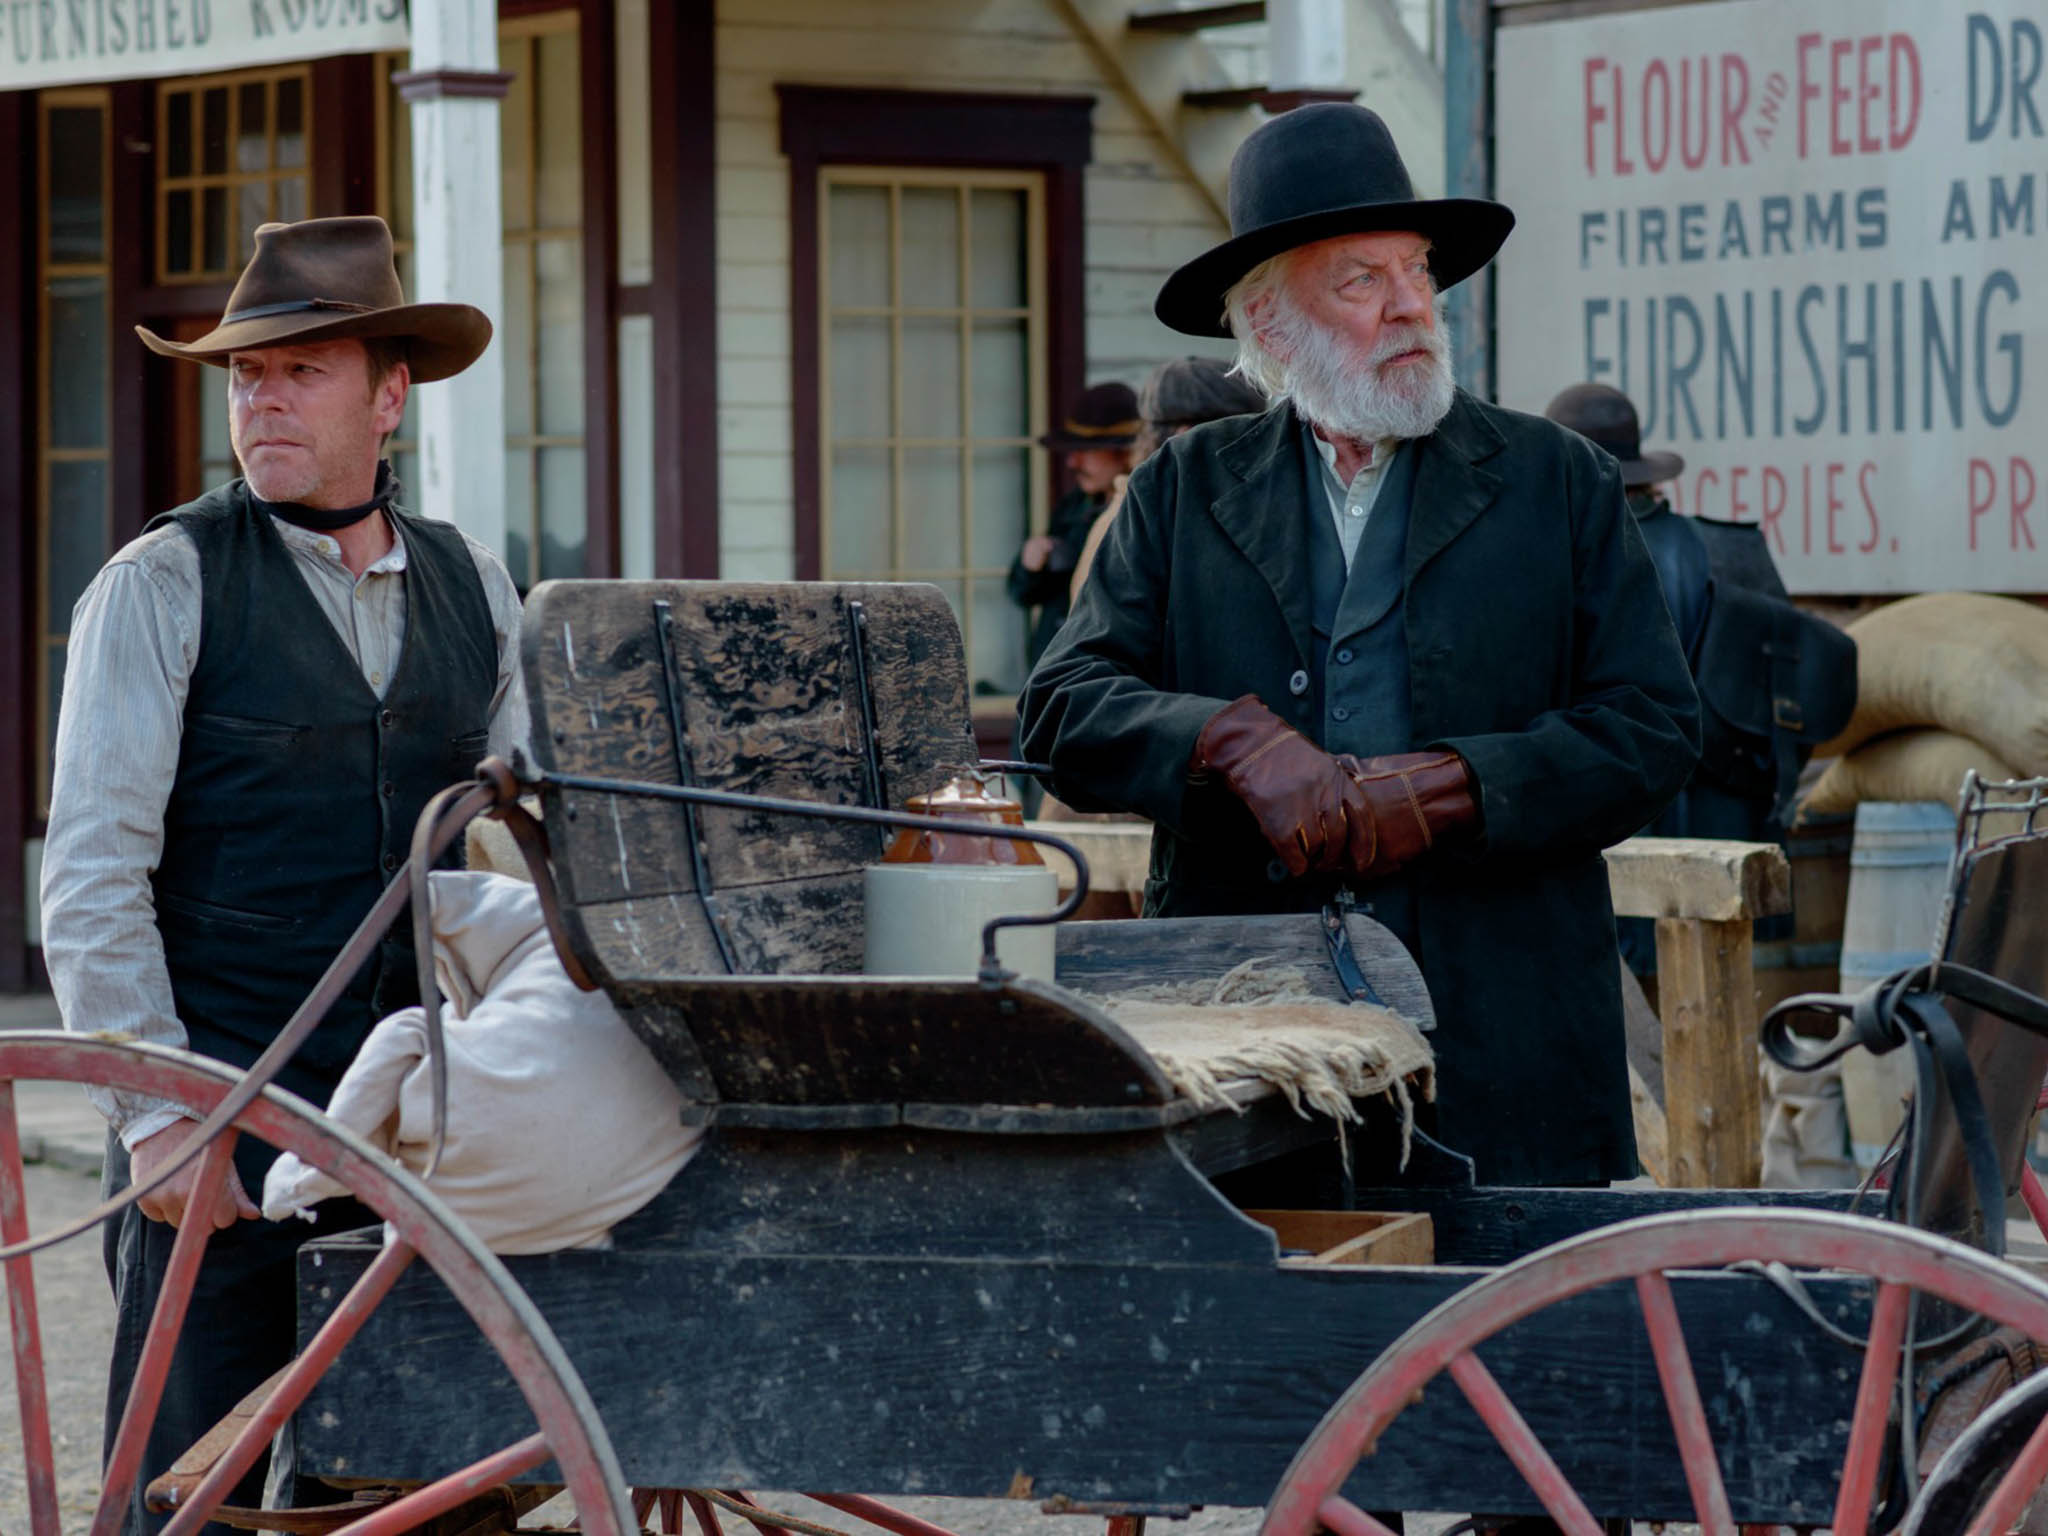 Kiefer Sutherland and Donald Sutherland starring together in their new film, Forsaken.